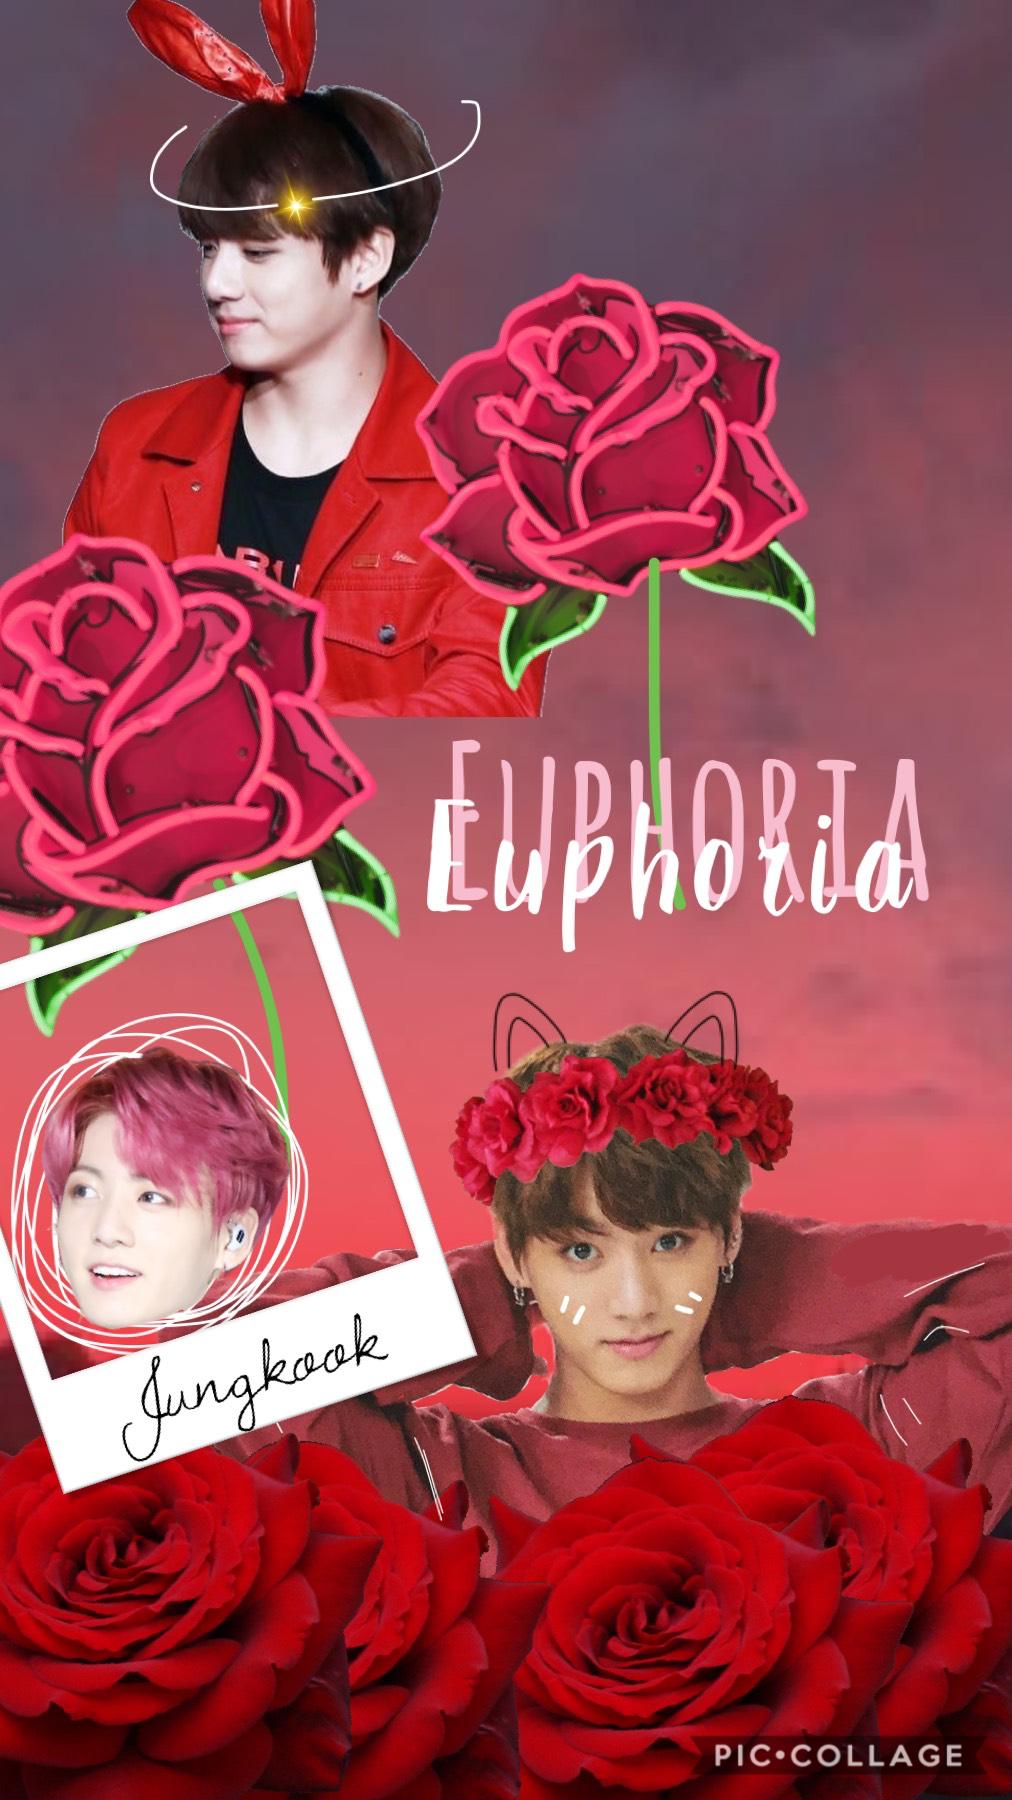 More wallpapers! Free to use on phone! BTS jungkook!!!❤️🙊